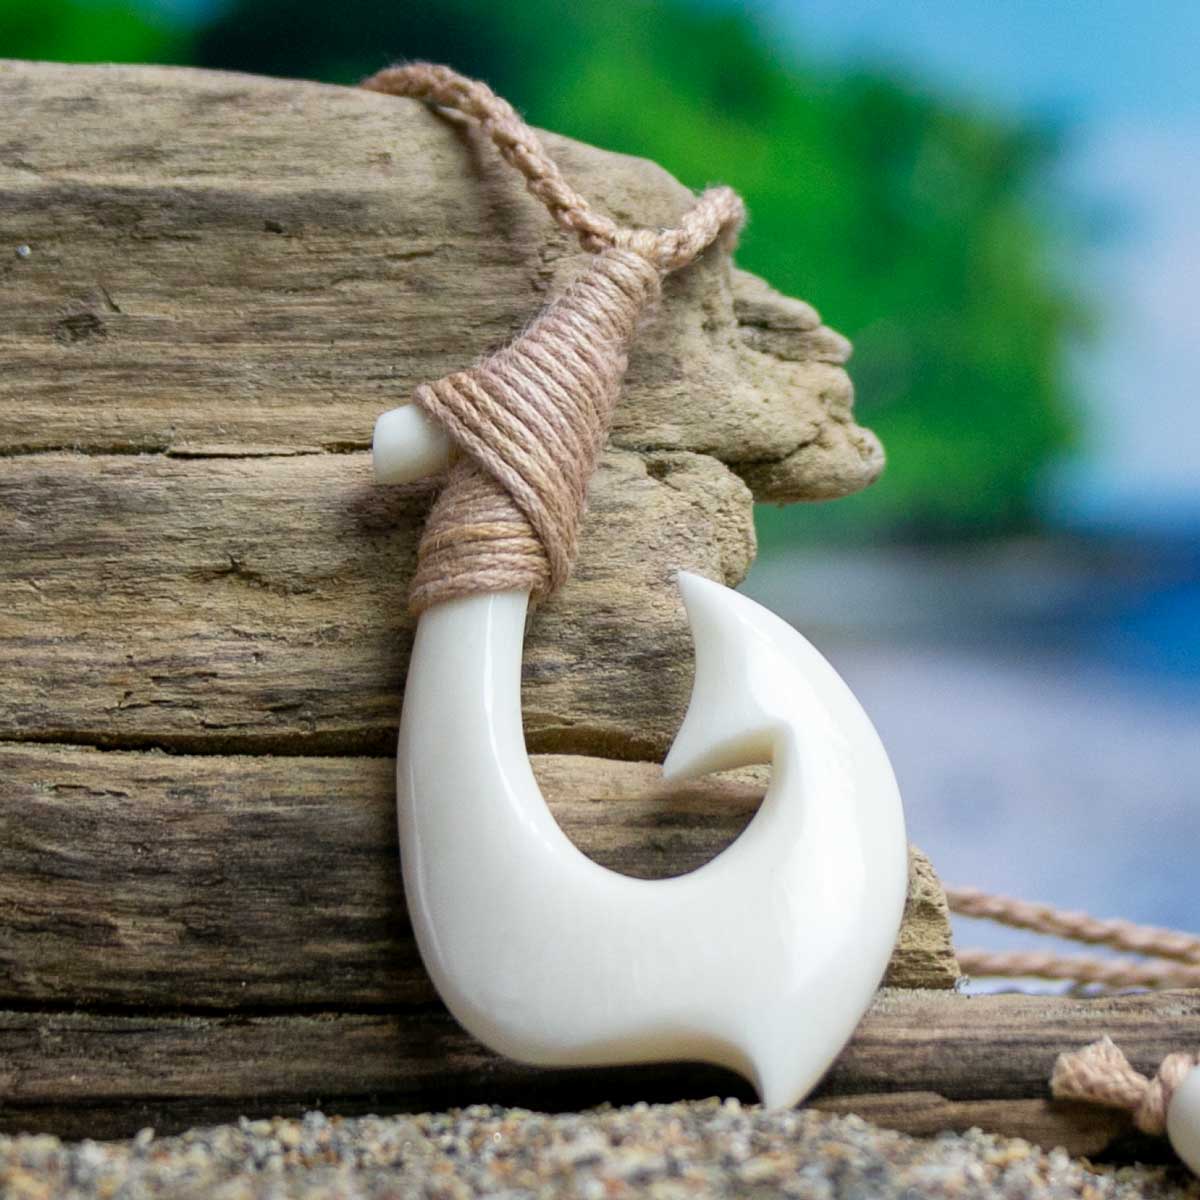 Fish Hook Necklace - Hand Carved Necklace - from Bali Necklaces